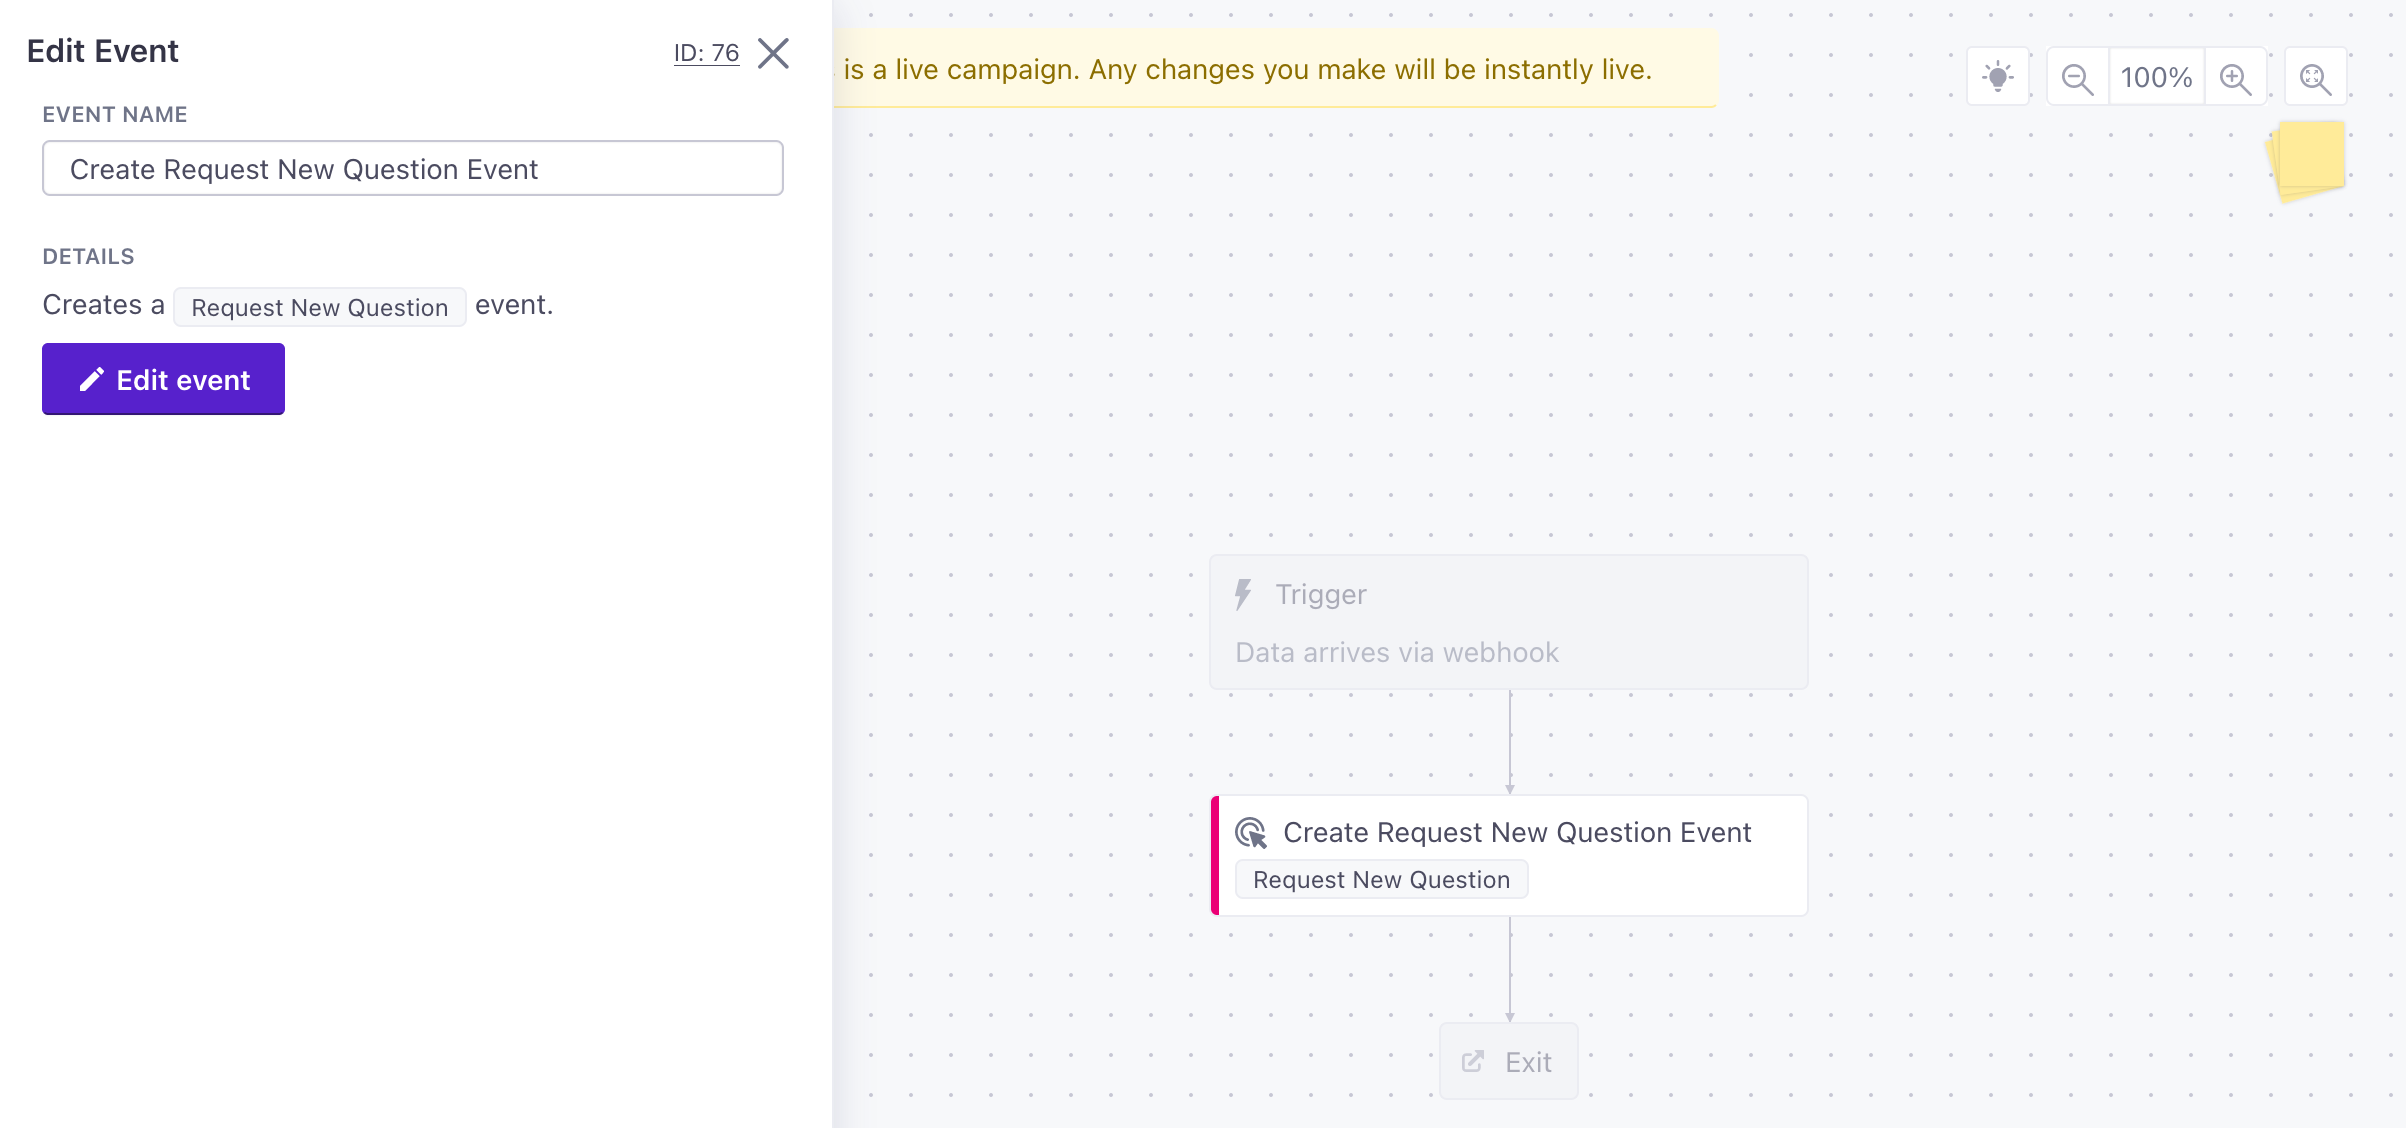 Add a create event action to your data campaign